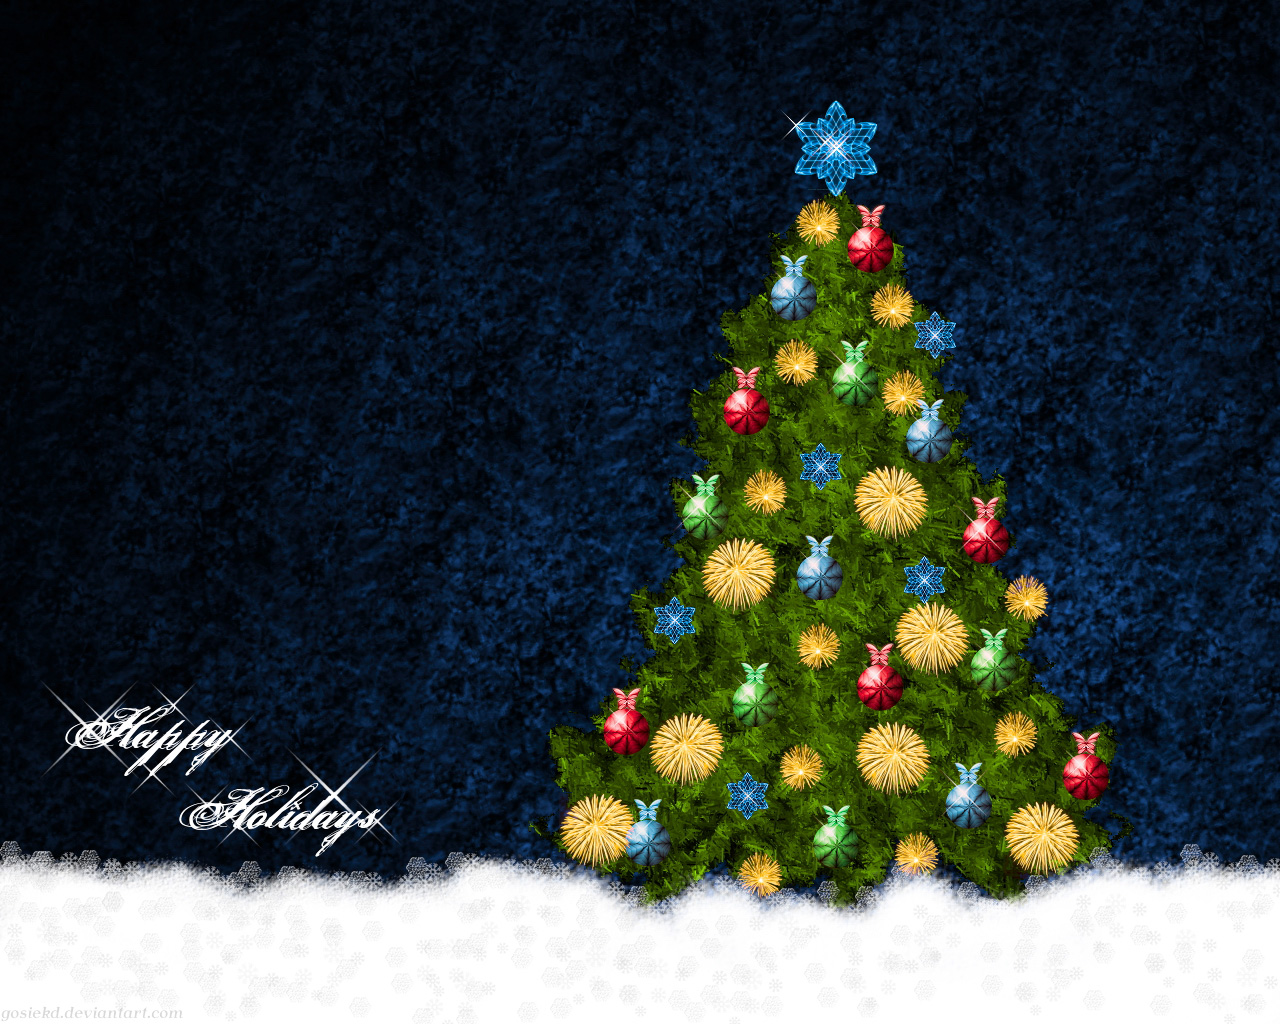 hIGH dEFINITION mOST bEAUTIFUL cHRISTMAS wALLPAPERS fOR ...